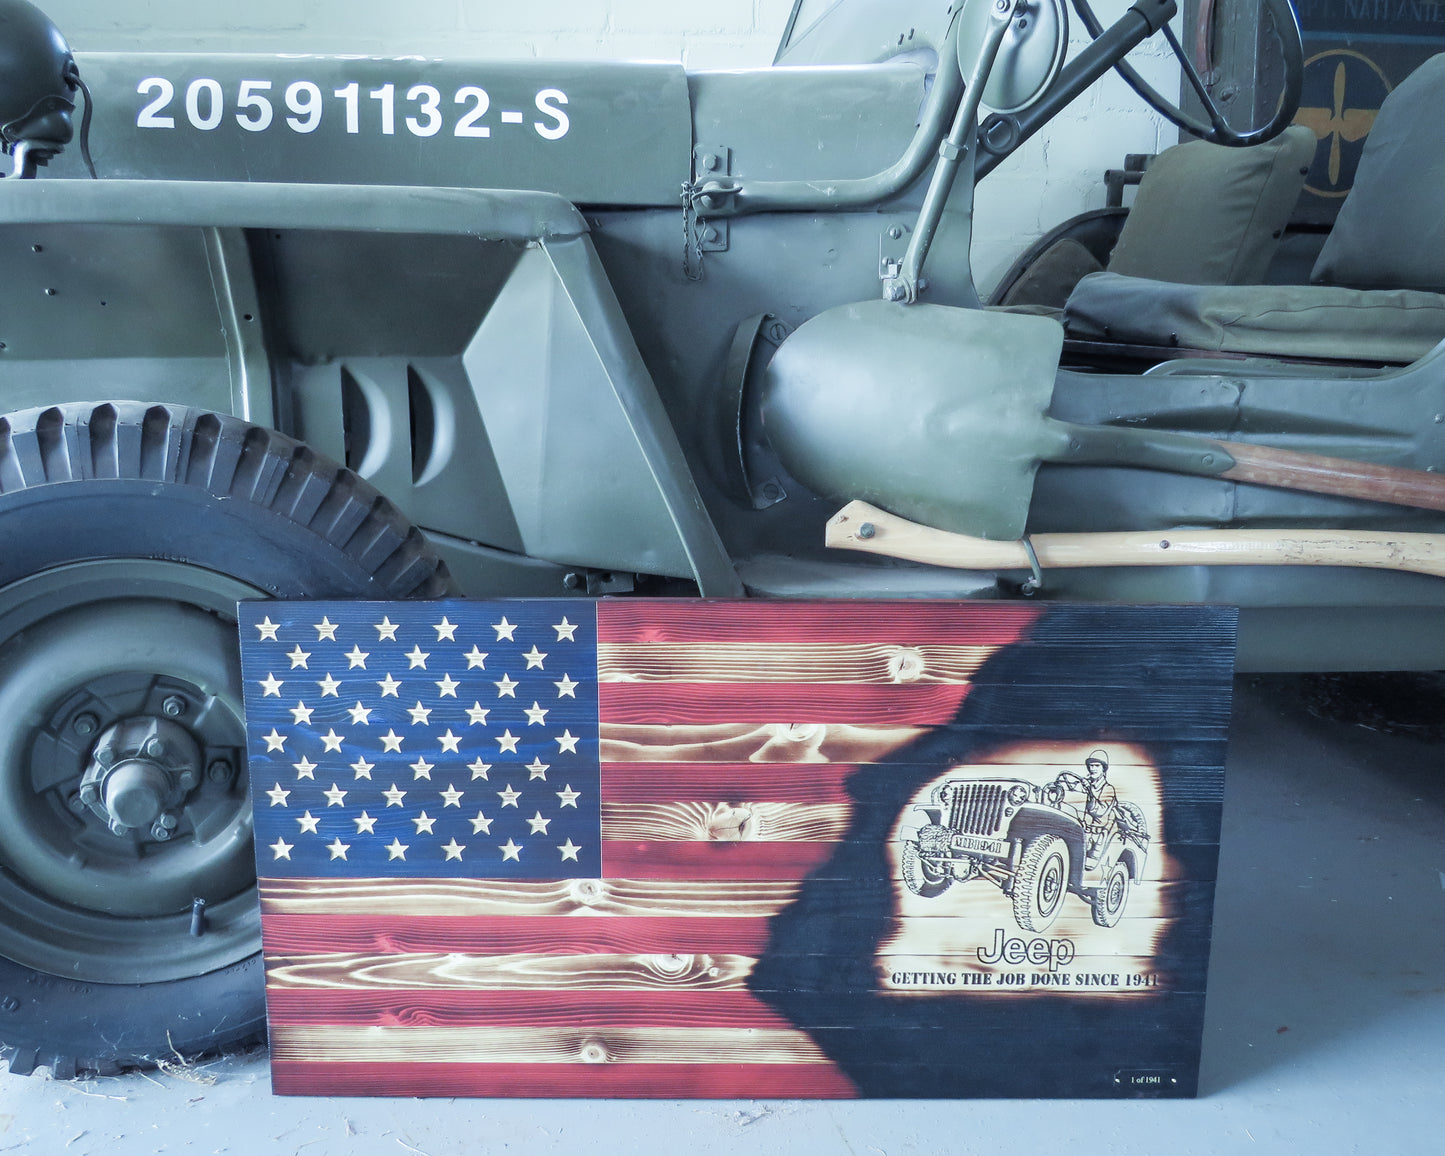 Limited edition Commemorative 1941 Jeep Willys flag